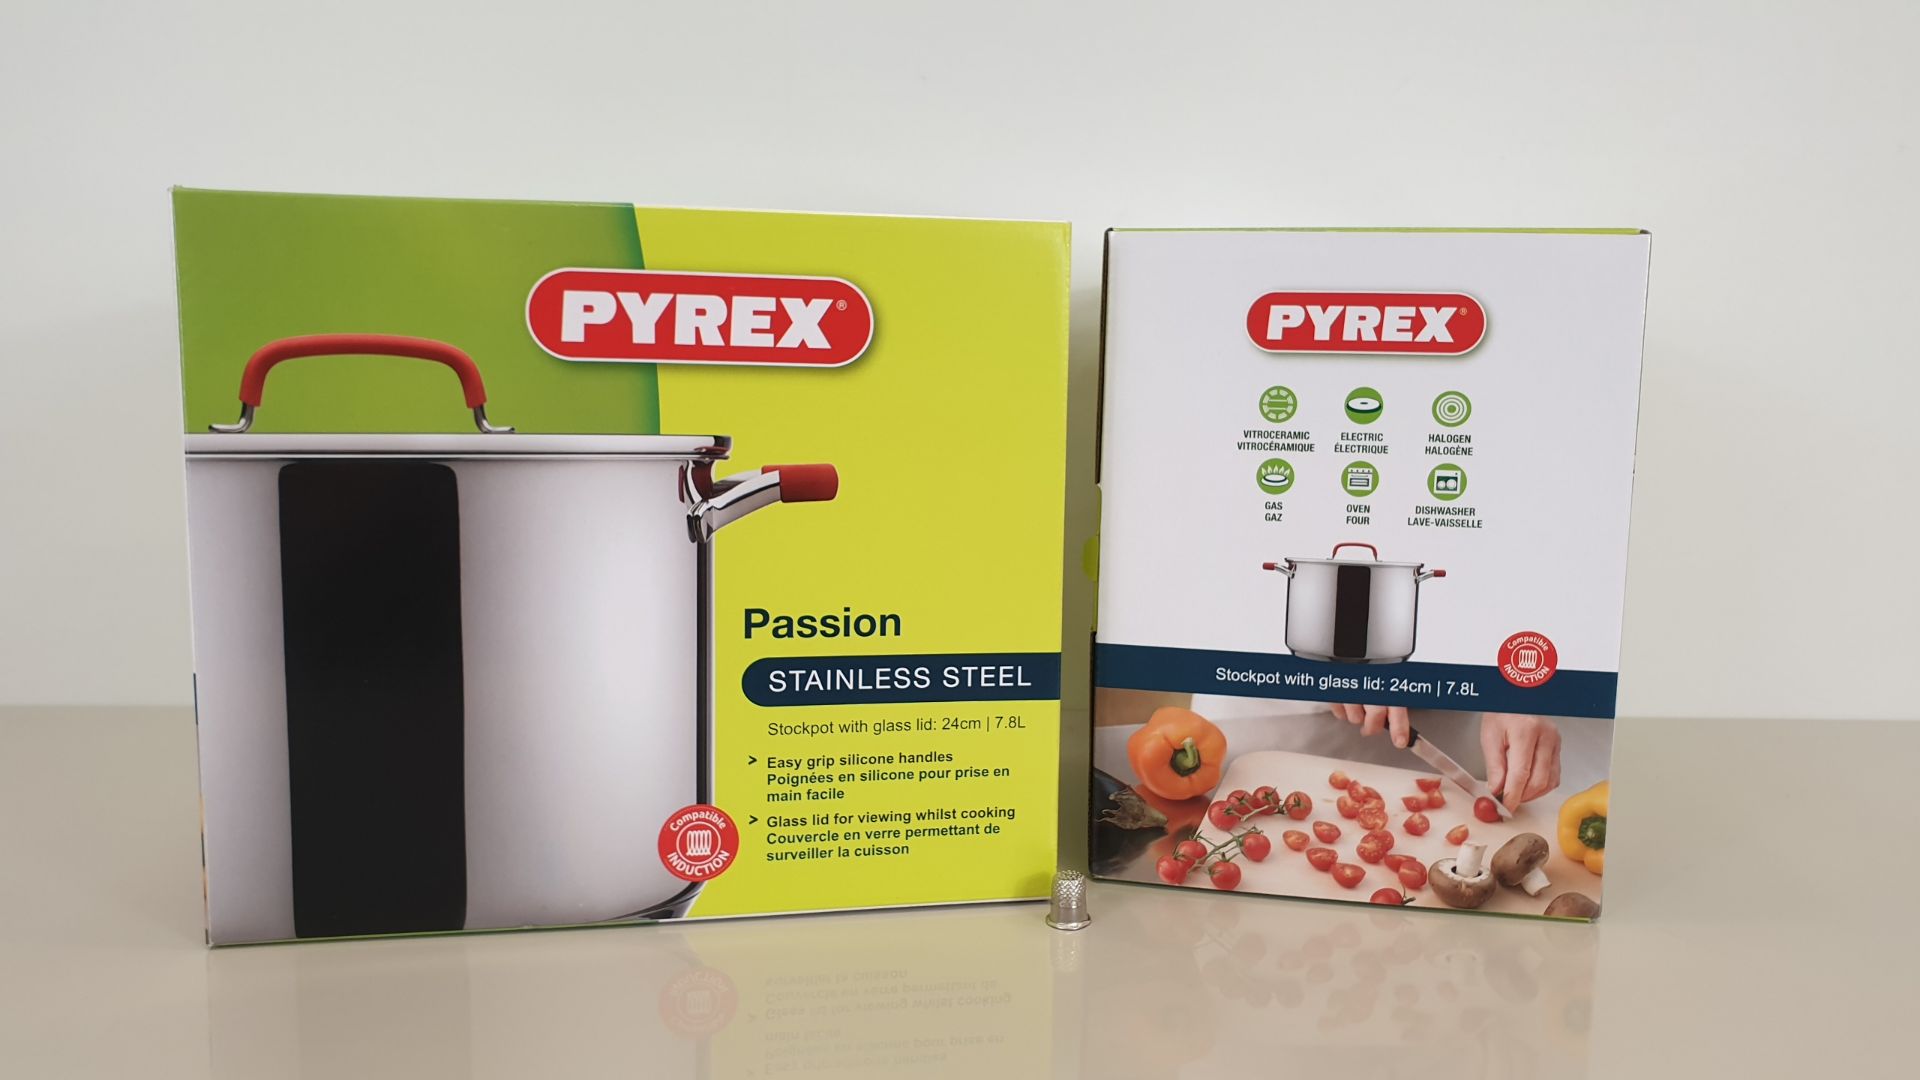 8 X BRAND NEW BOXED PYREX PASSION STAINLESS STEEL STOCKPOT WITH GLASS LID - 24CM / 7.8L - IN 4